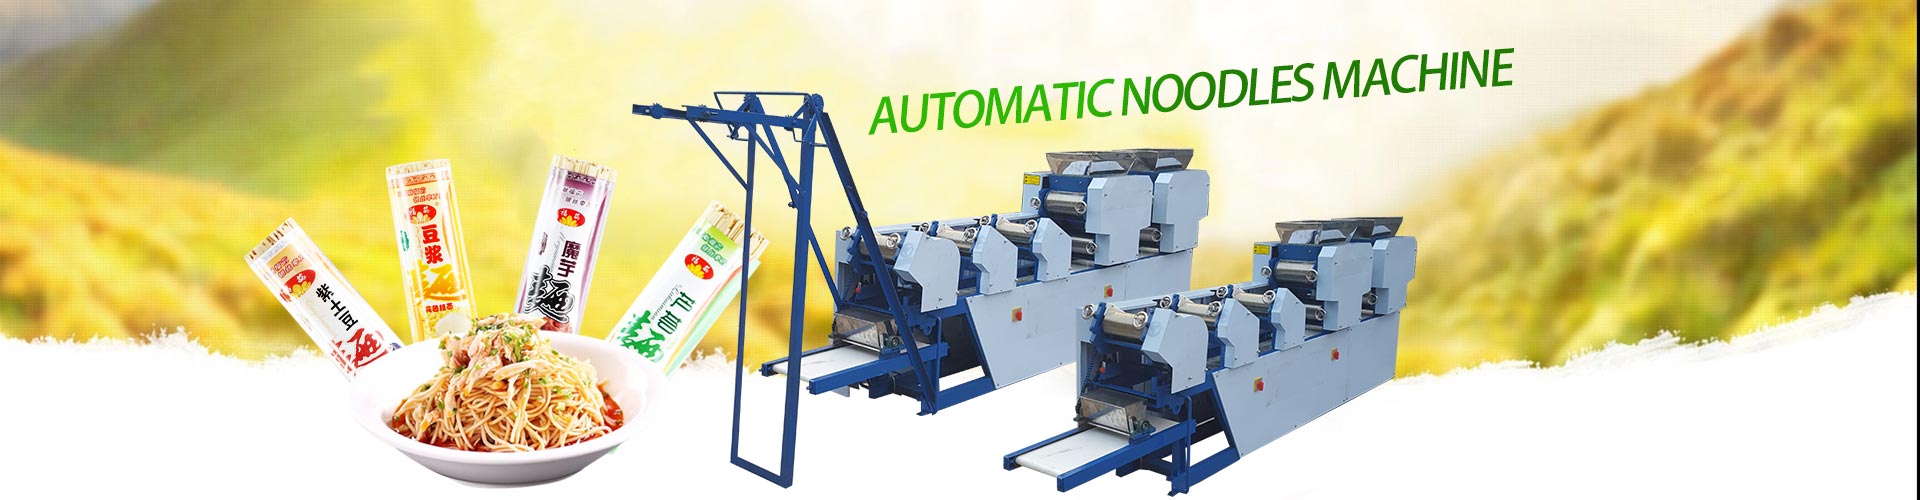 Automatic Noodles Making Machine With 9 Rollers